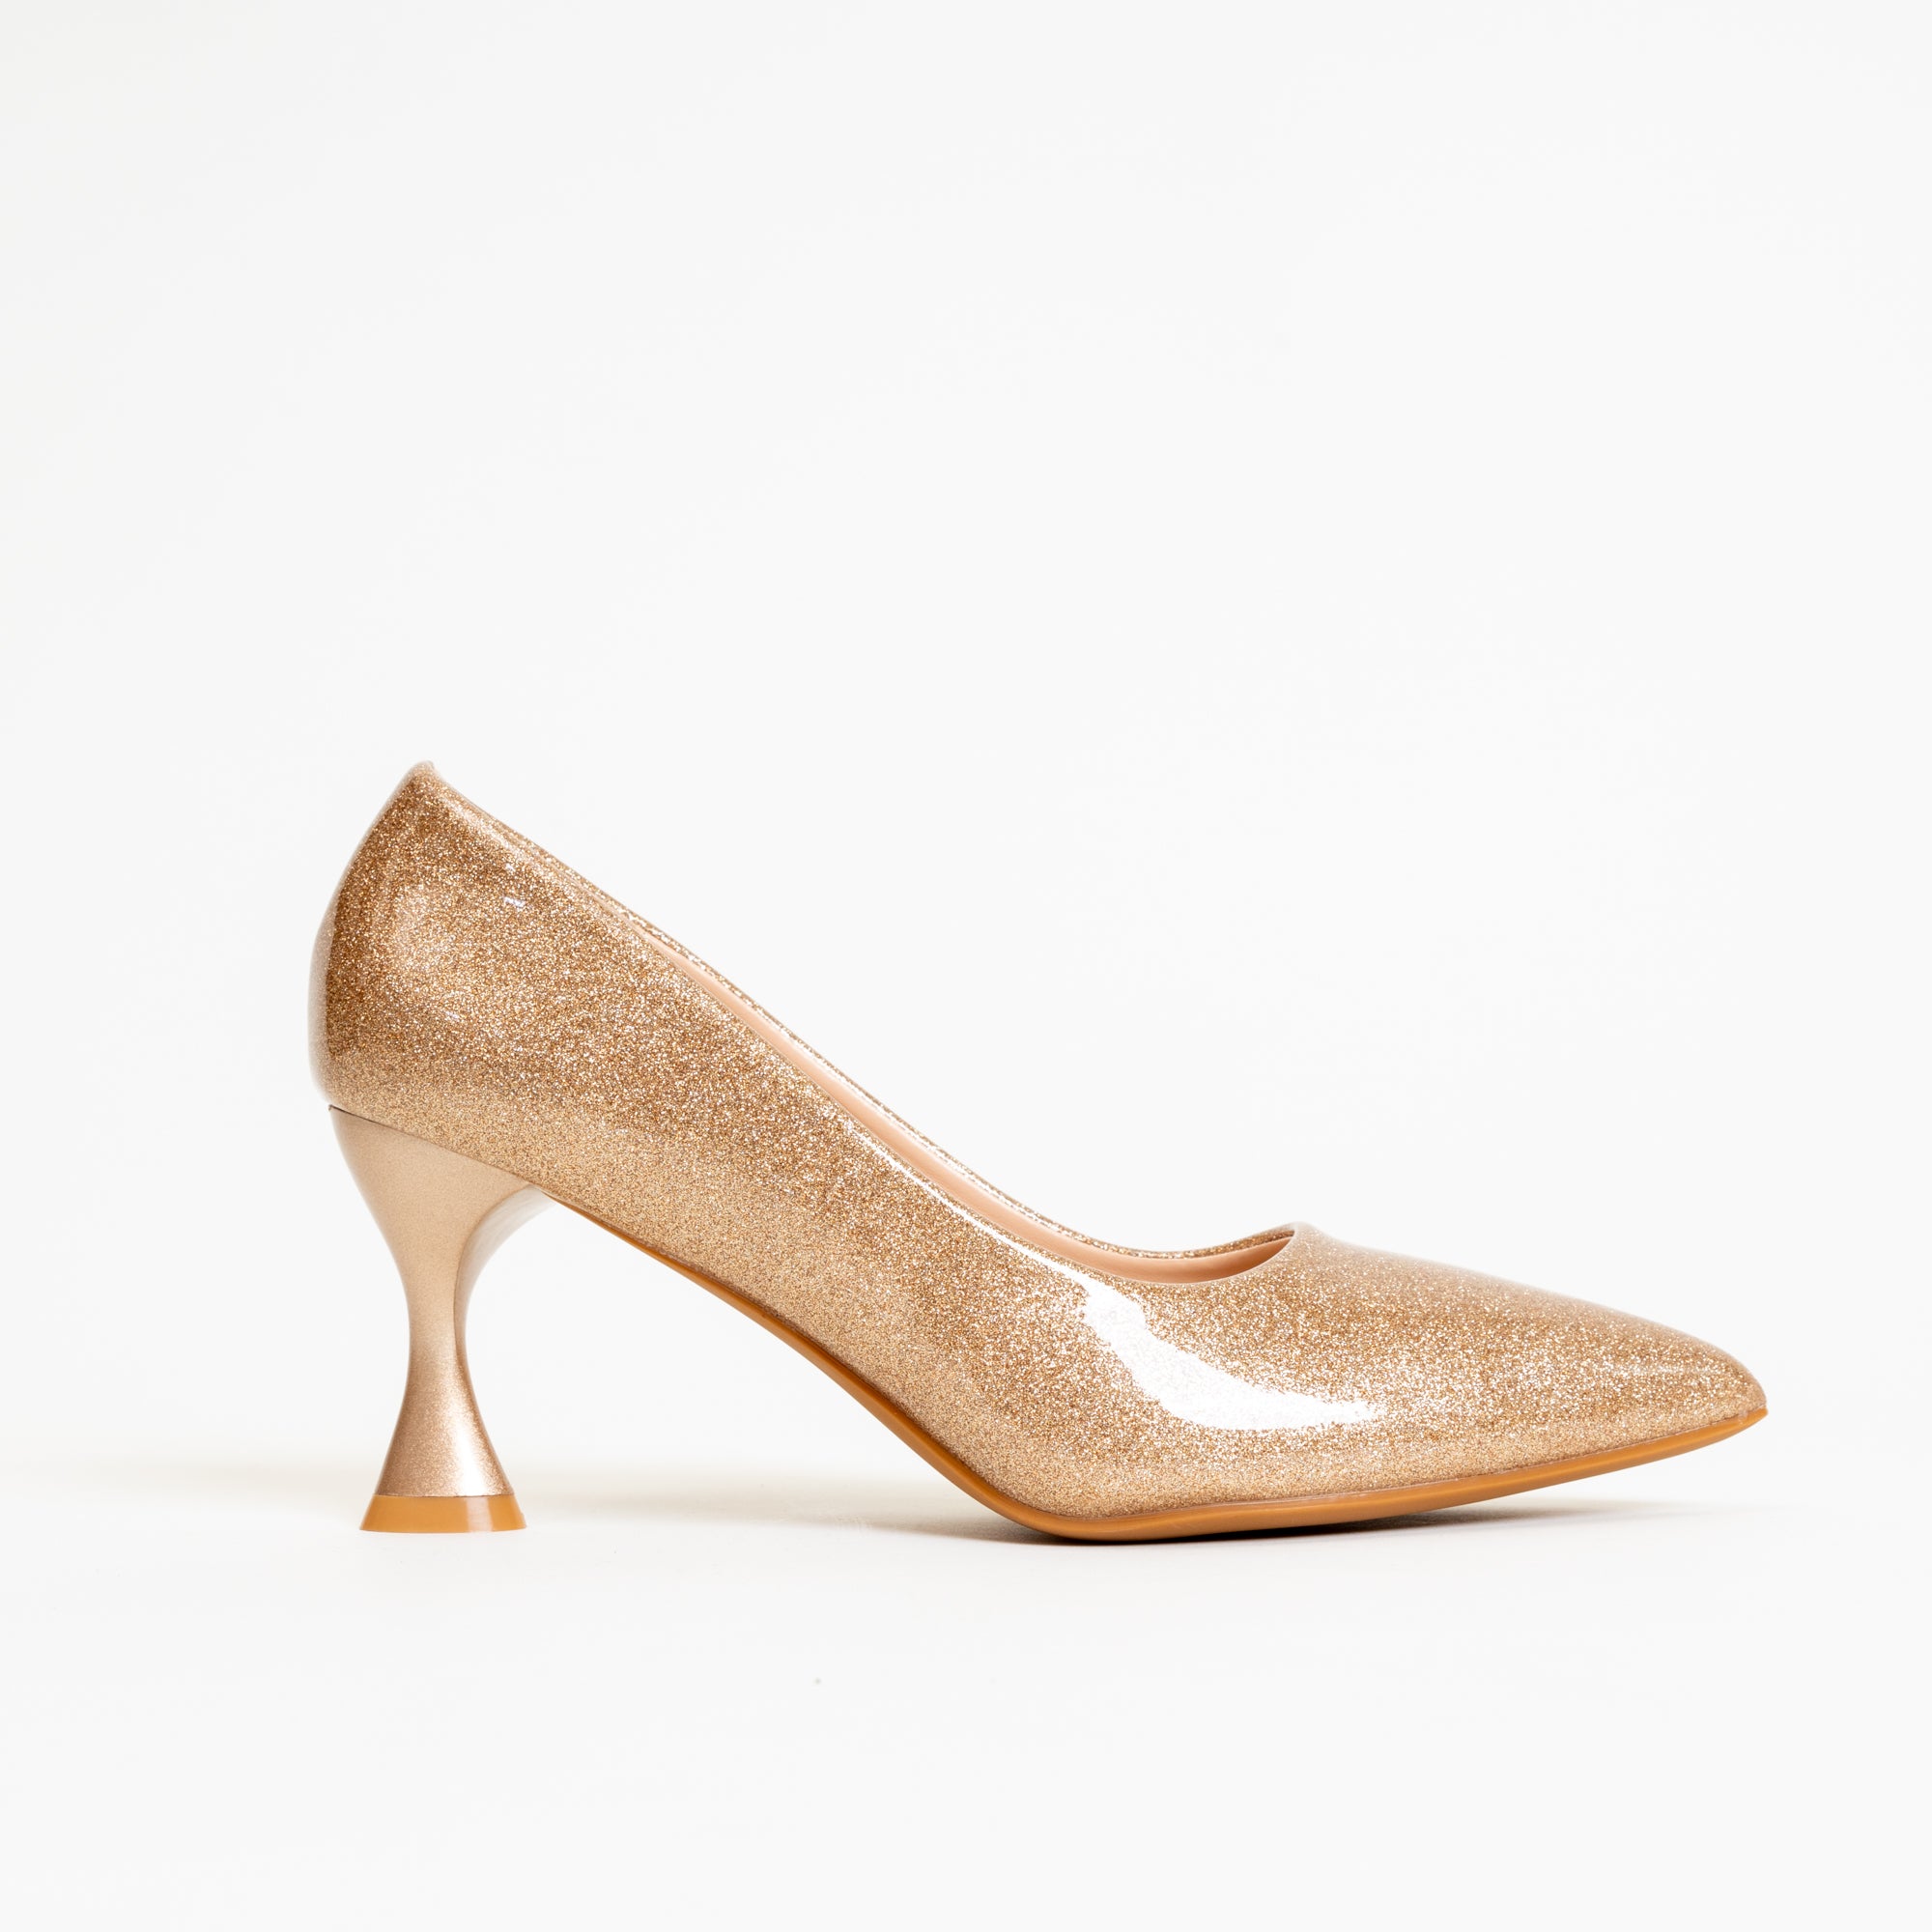 DOROTHY's DREAM-Party Wear Pumps in-Champagne.